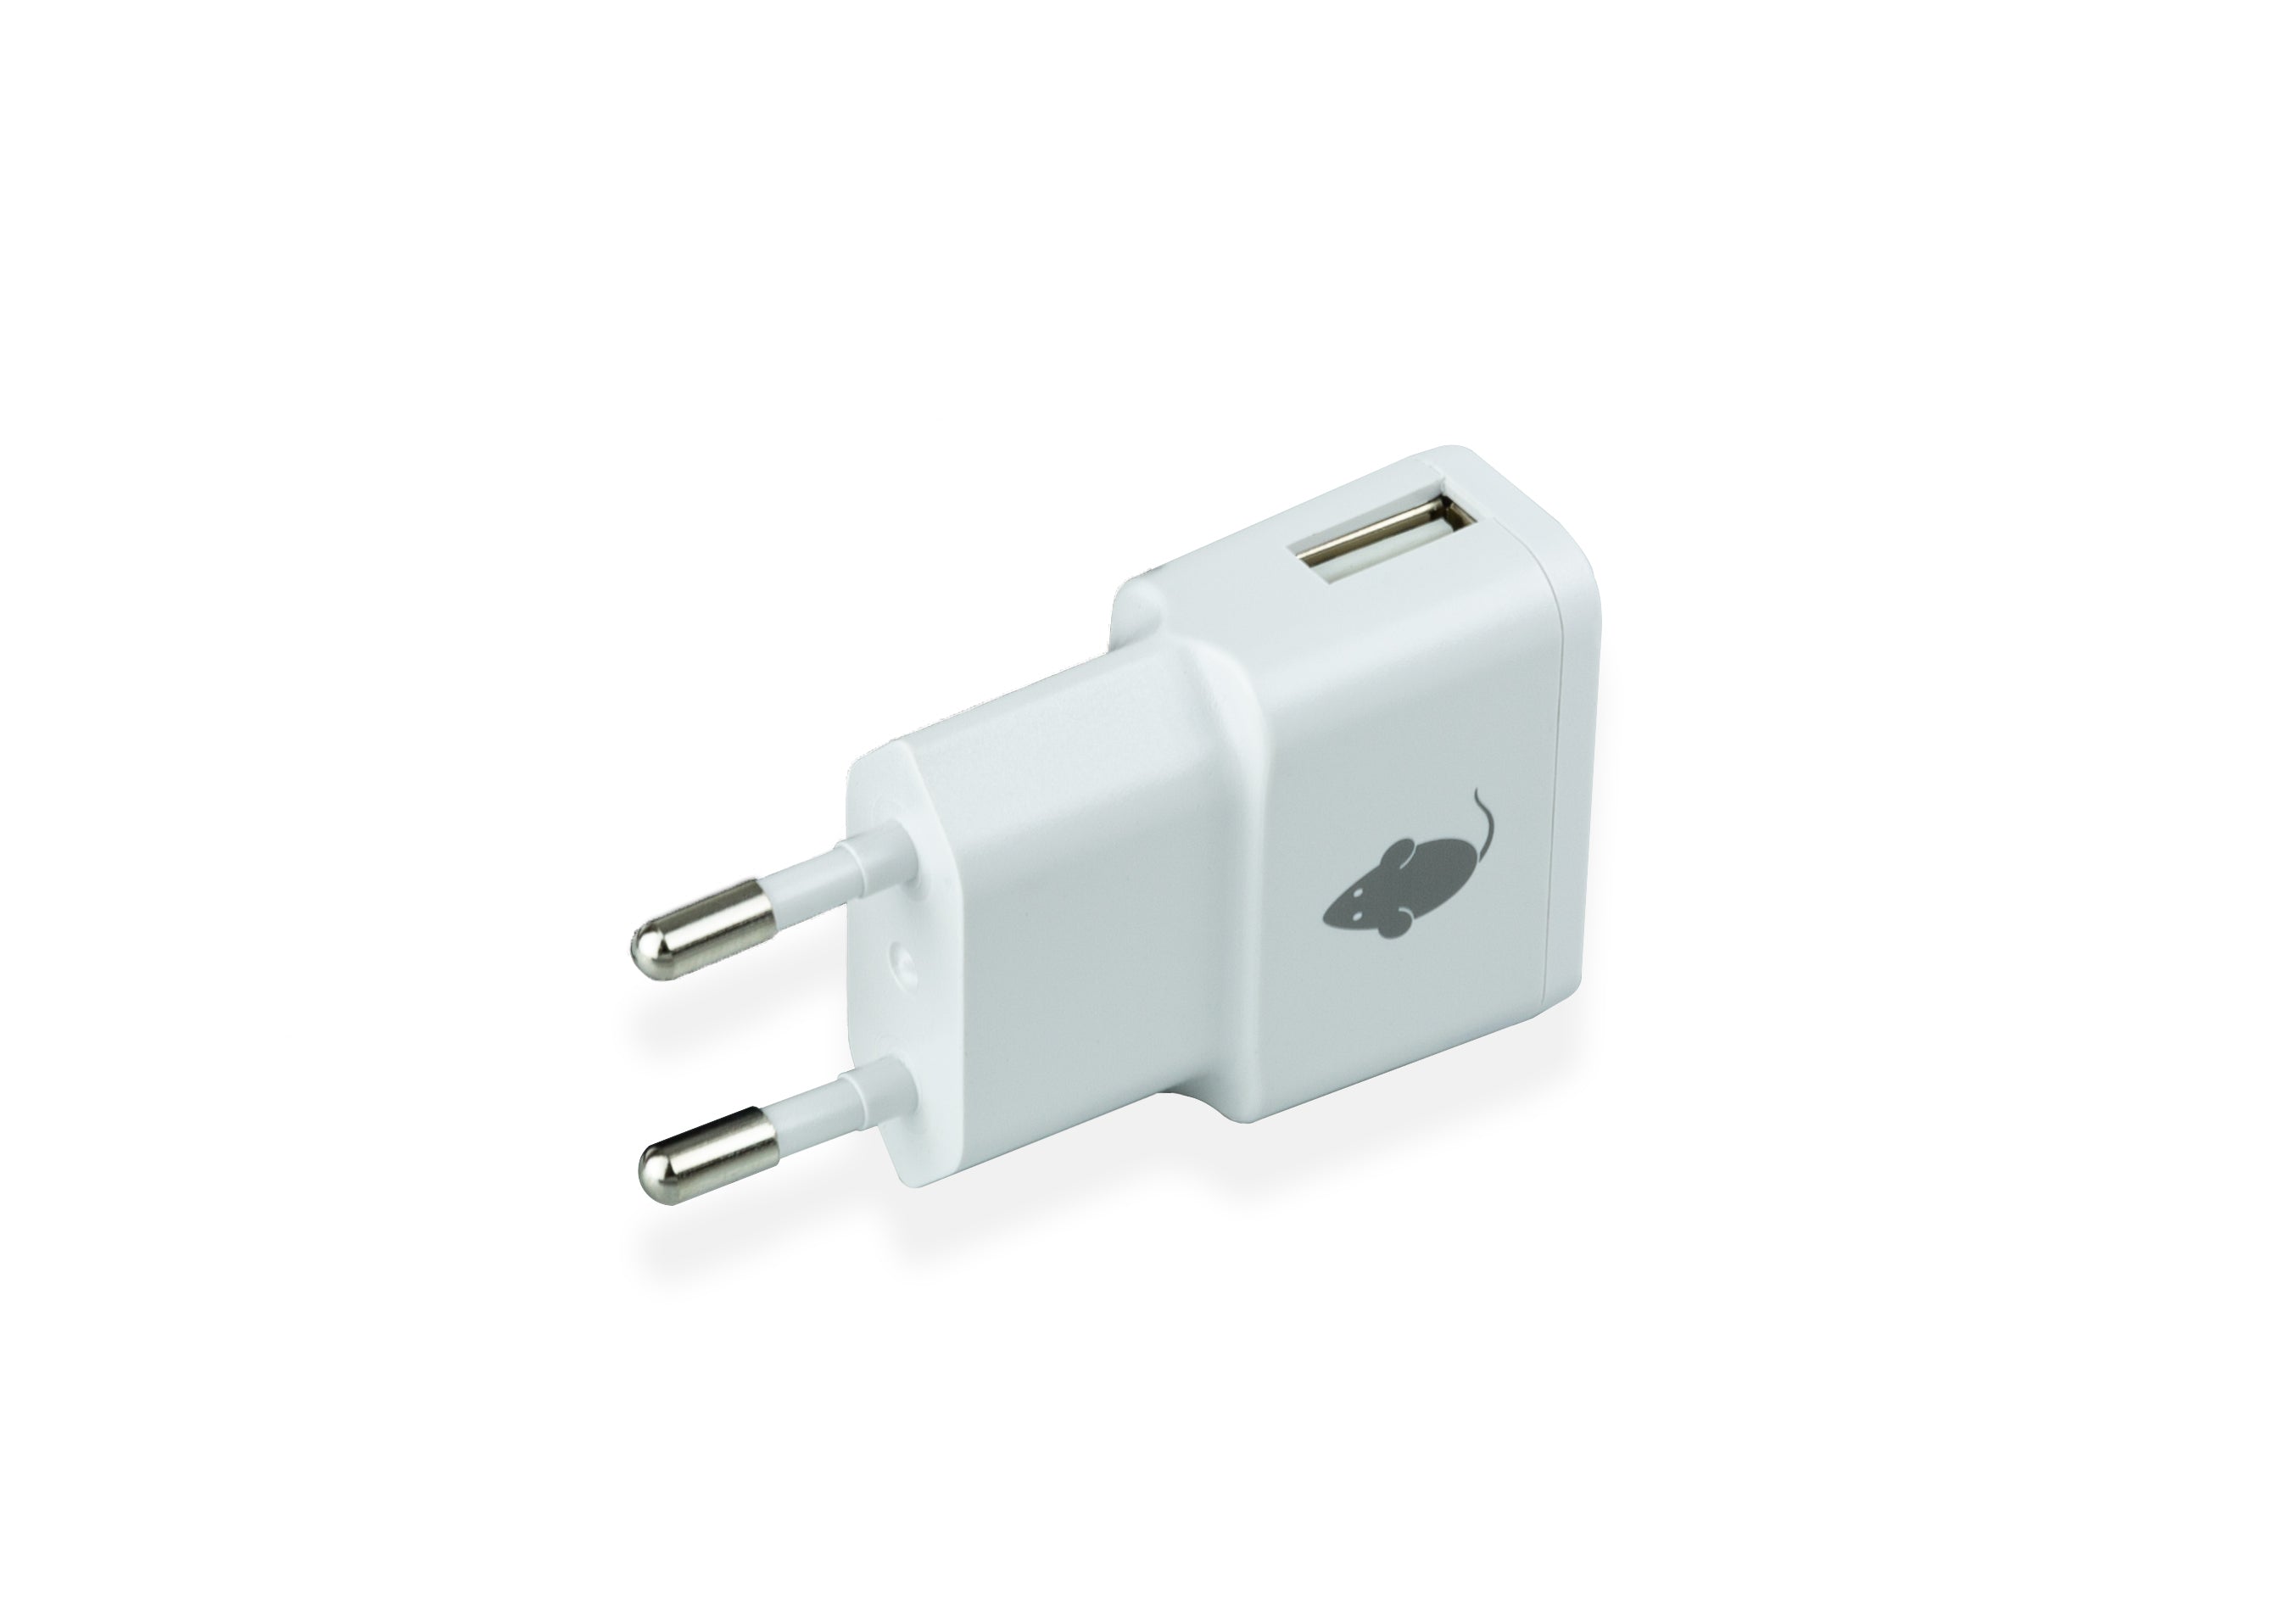 Greenmouse USB Wall Charger